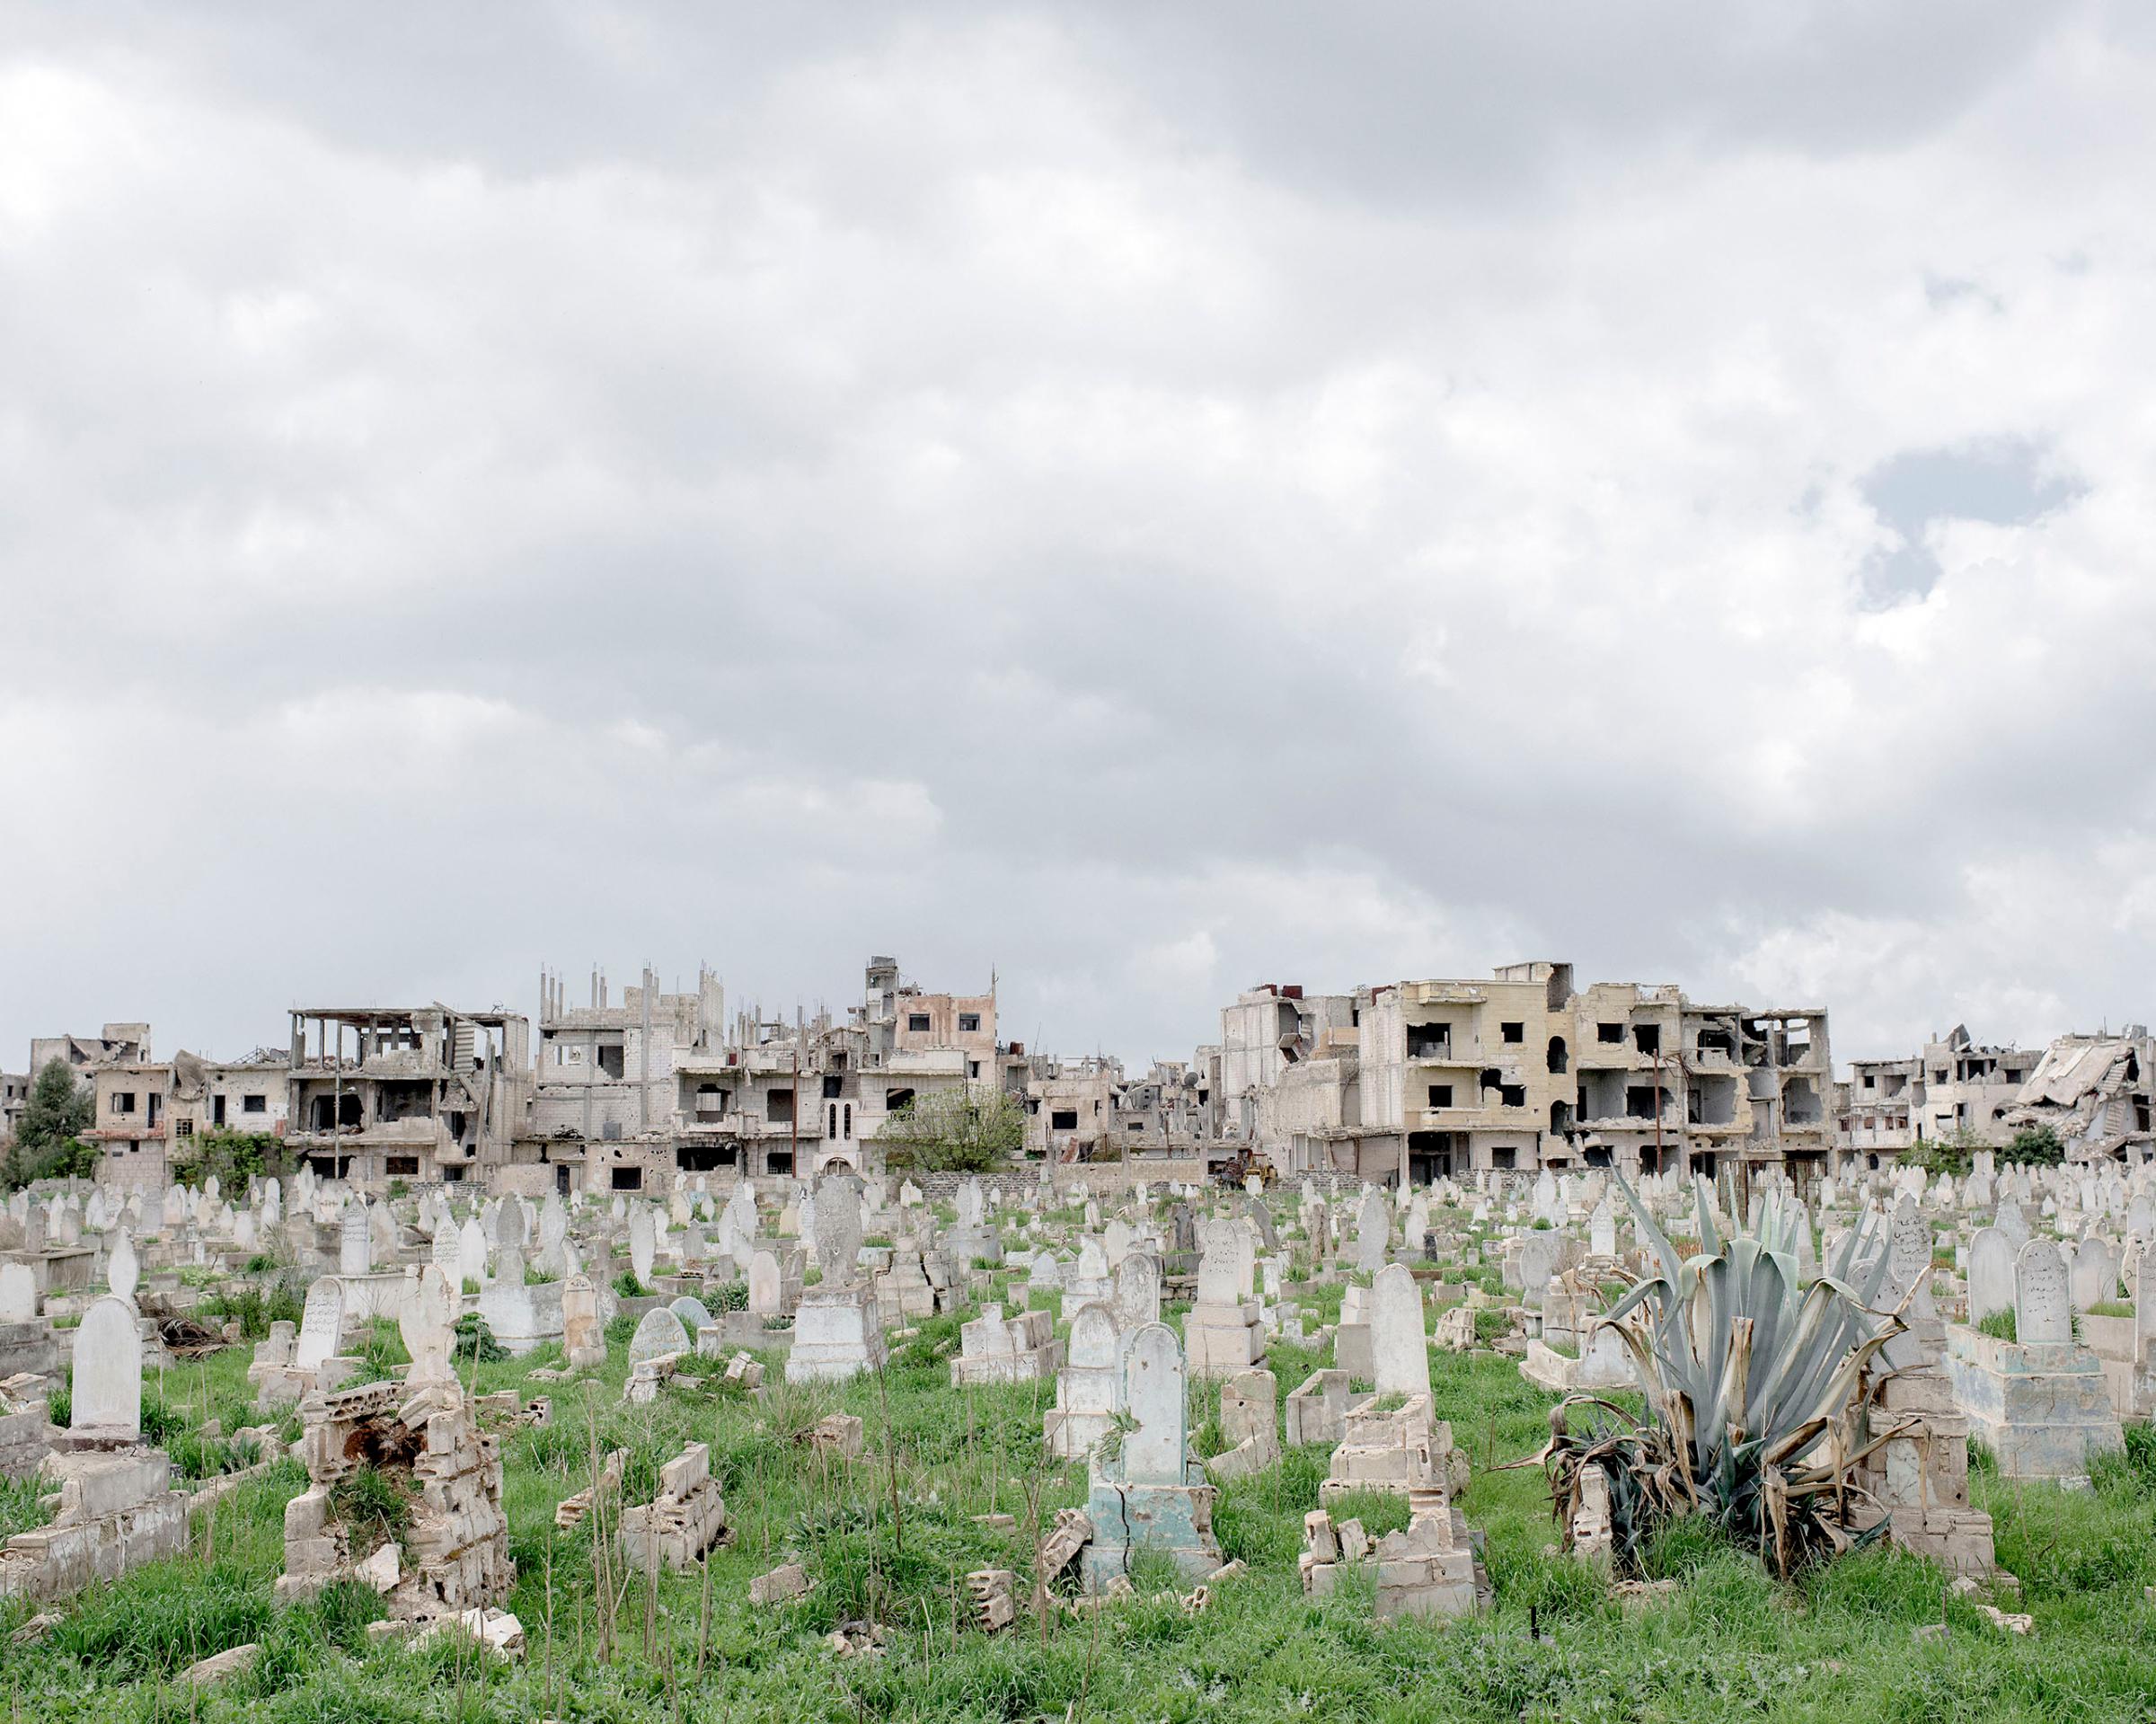 The ancient cemetery in the Bab Amr district of Homs, Syria, March 2016.